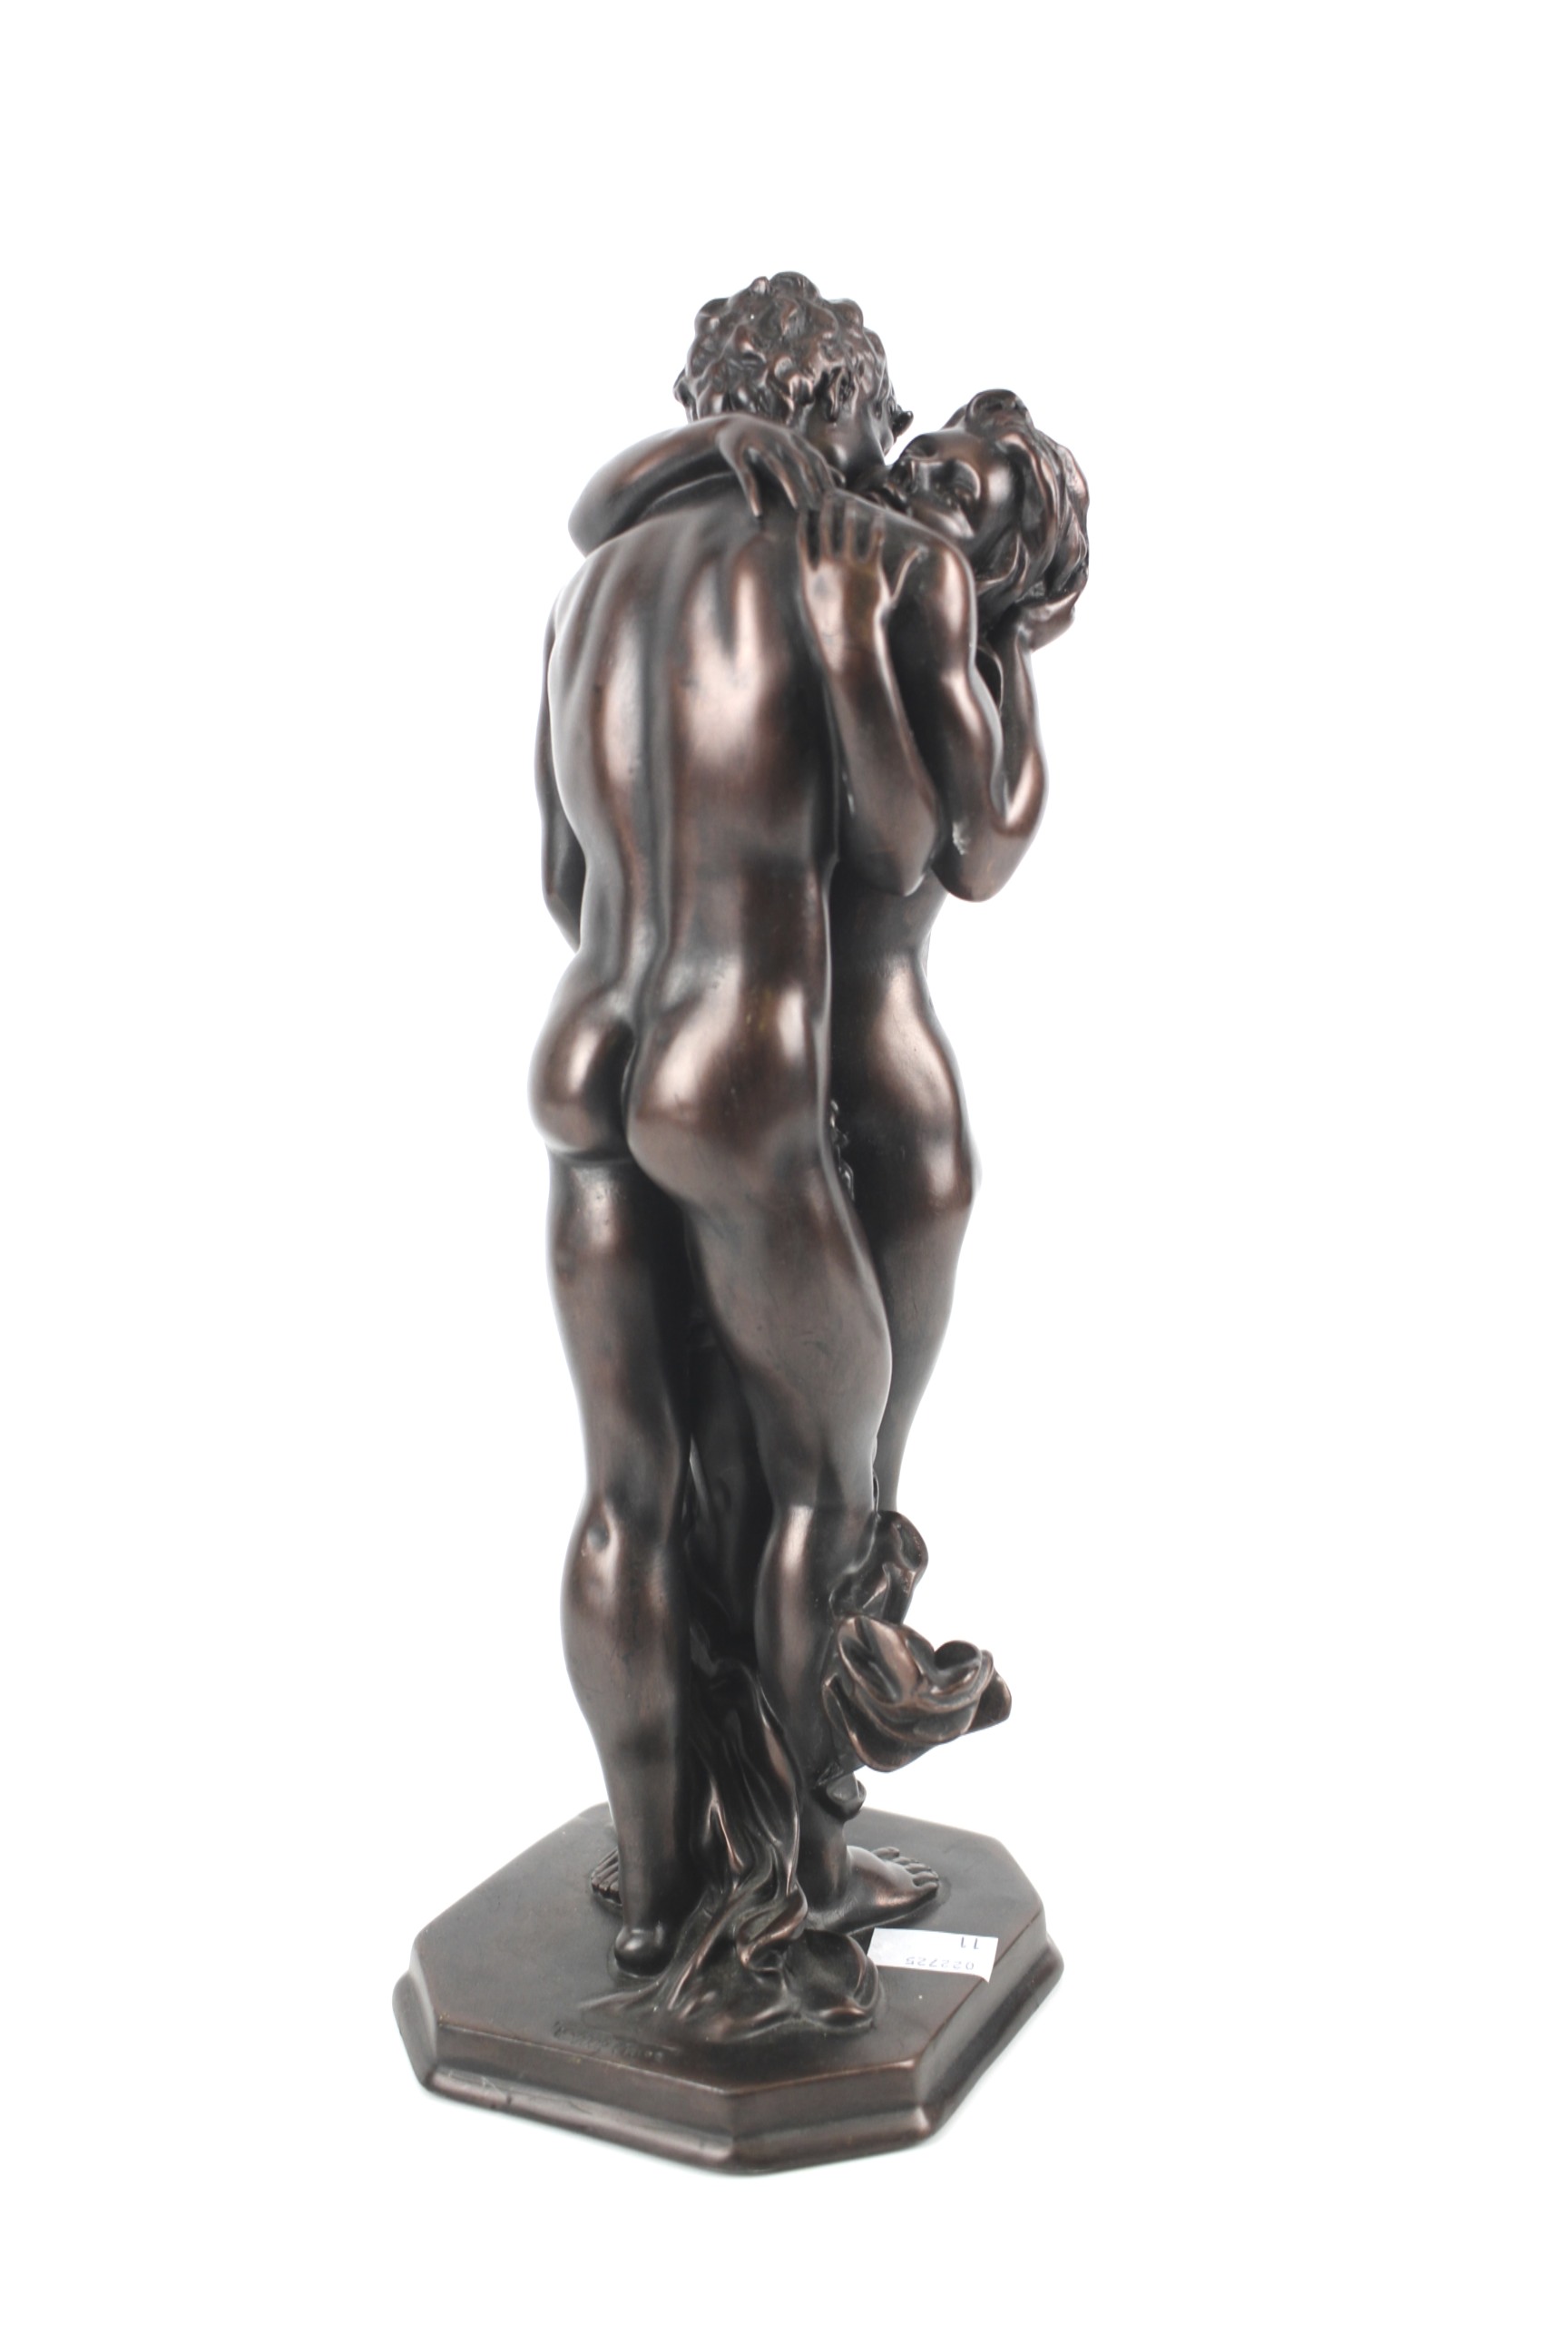 A bronze effect figure group of a pair of lovers embracing. Signed Crosa 2002. H35. - Image 2 of 3